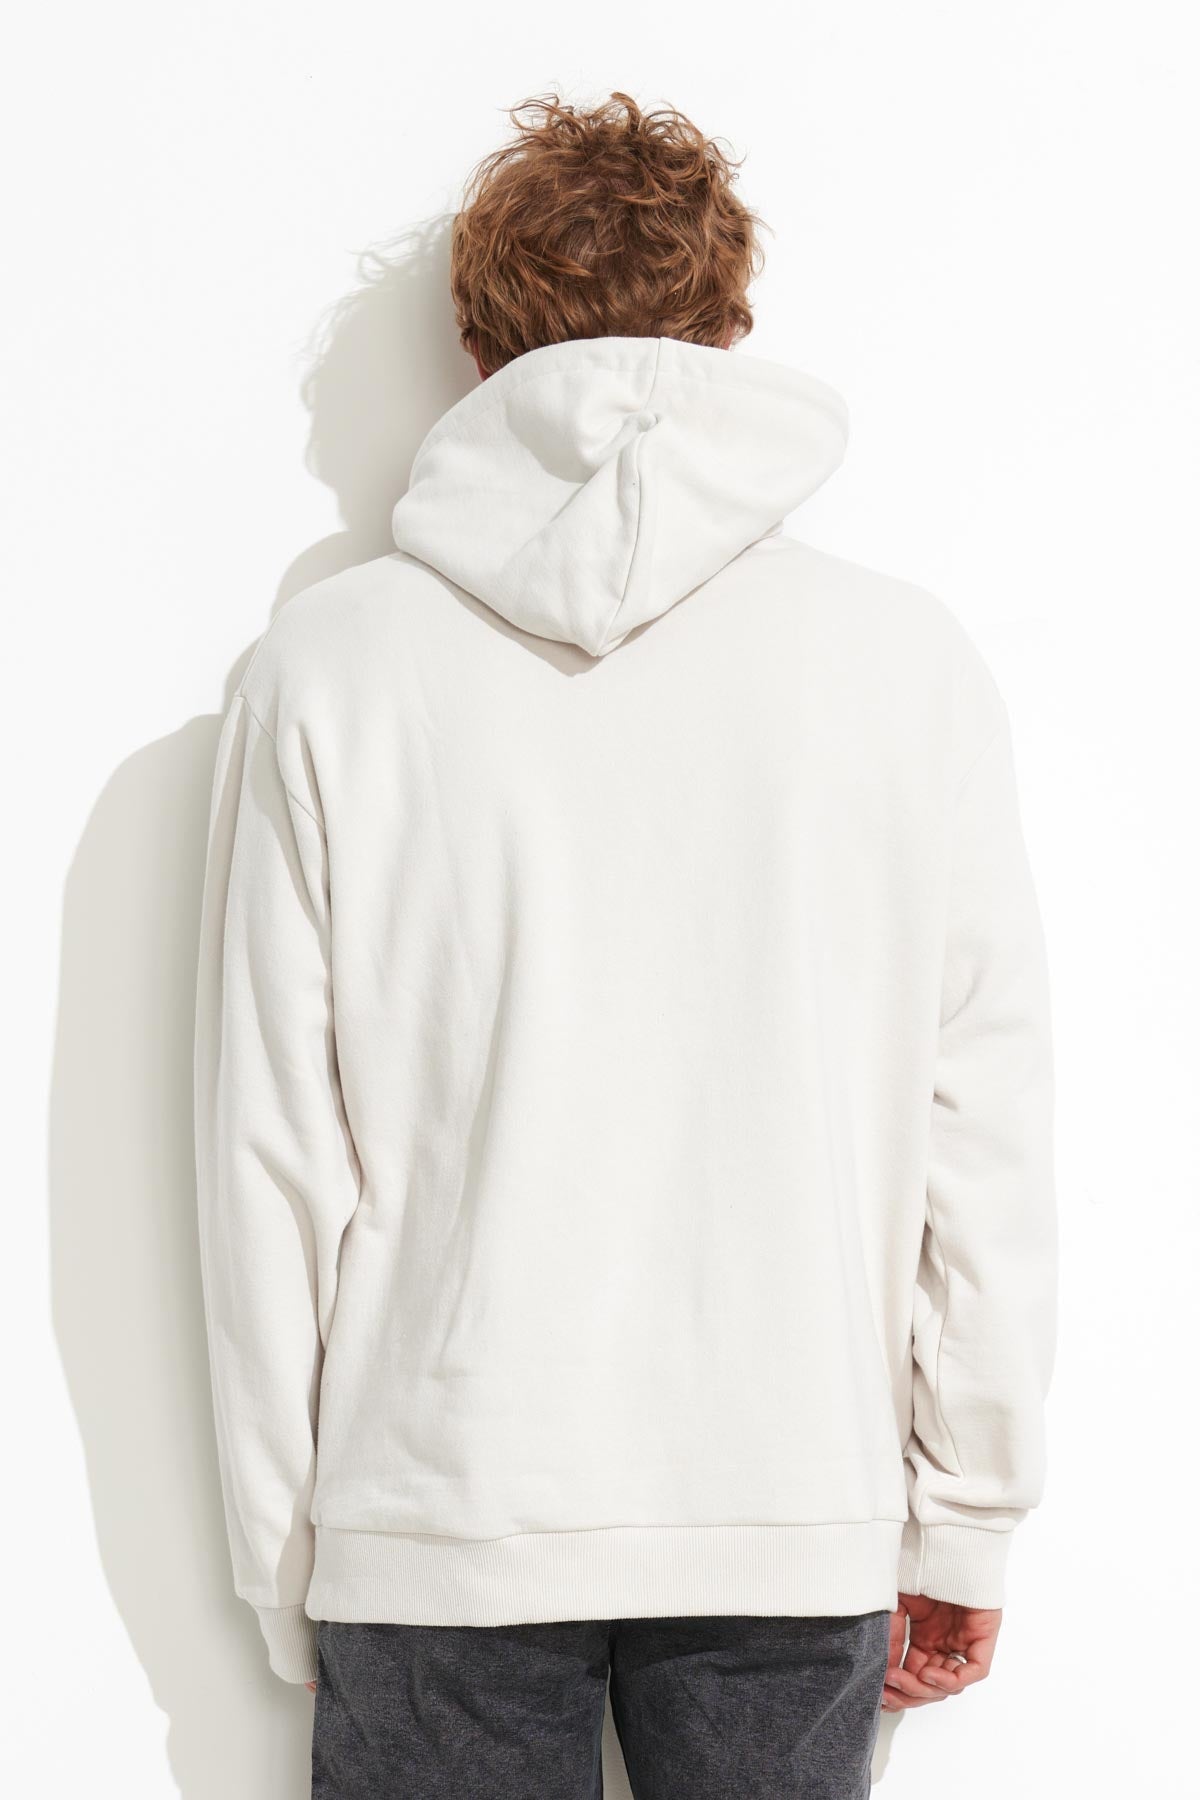 Misfit Shapes - Supercorporate 3.0 50-50 Hood - Thrift White